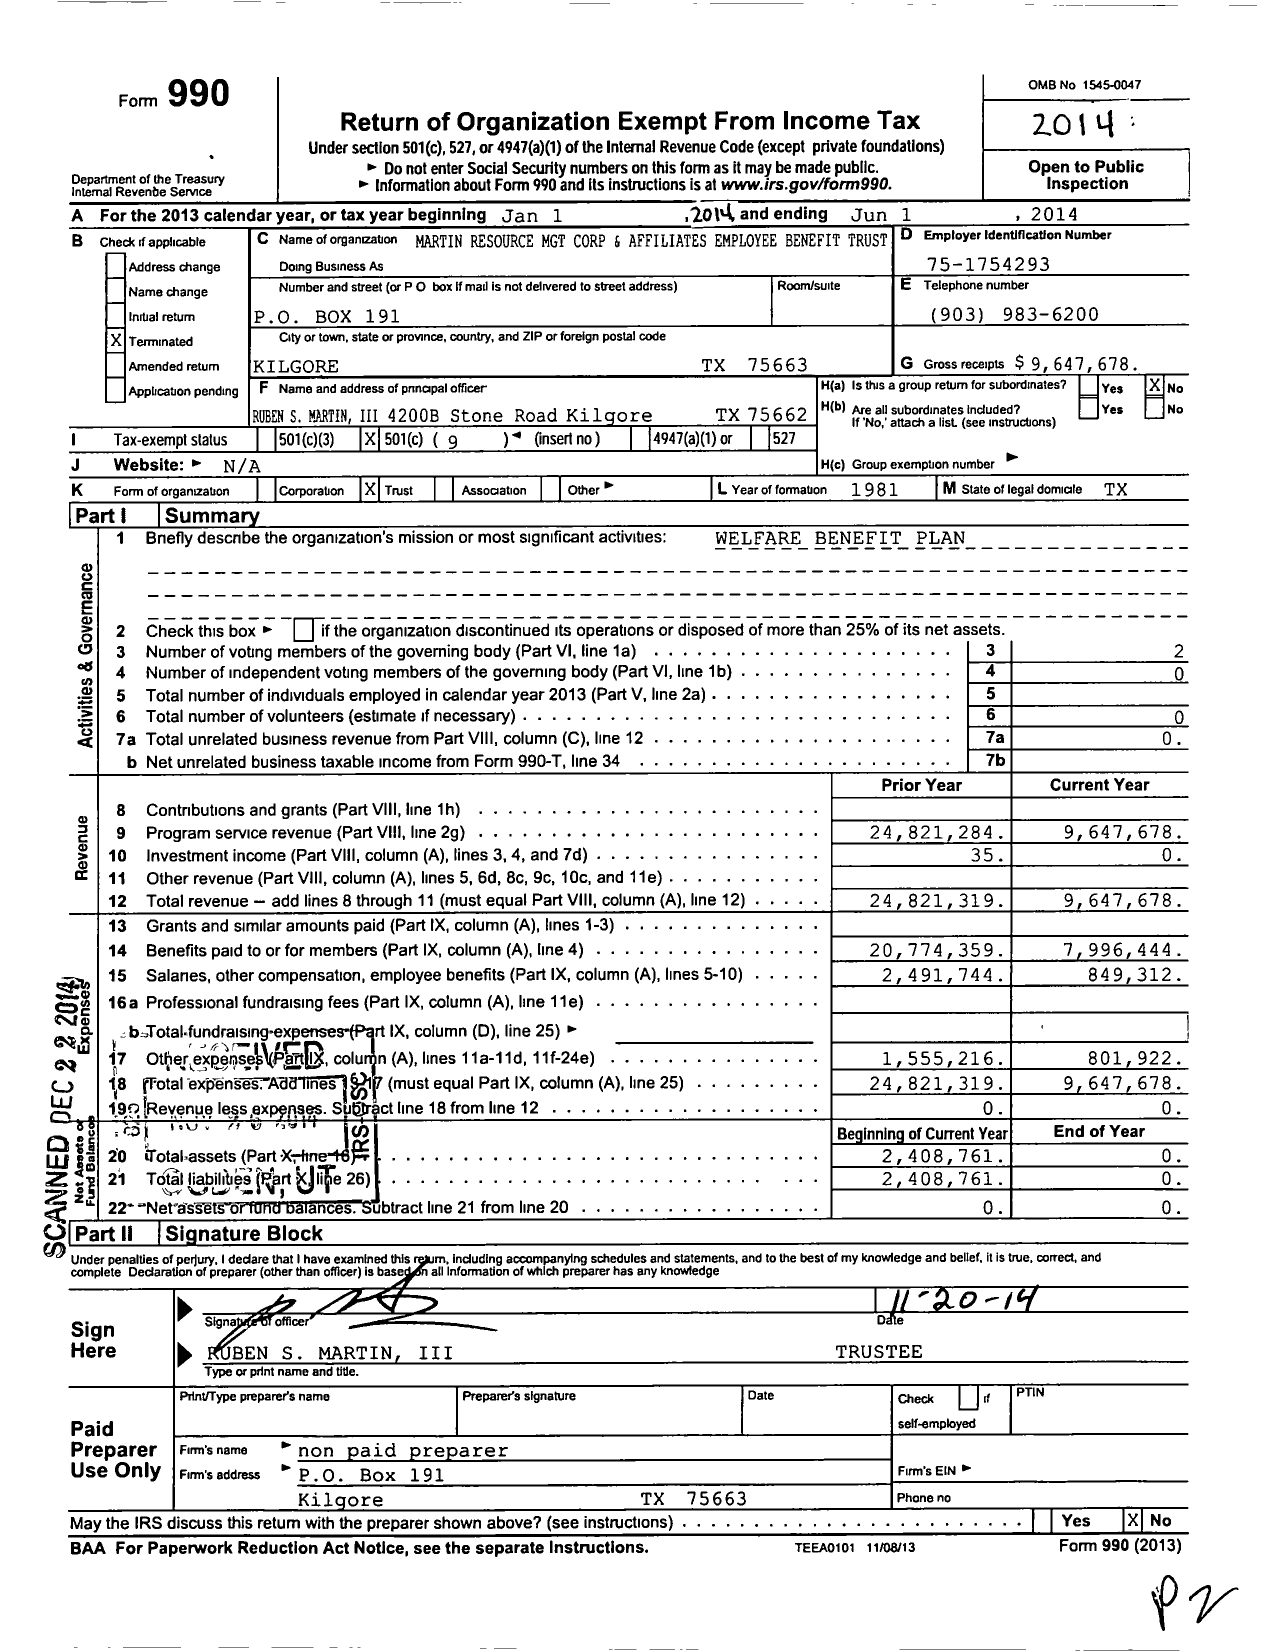 Image of first page of 2013 Form 990O for Martin Resource MGT Corp and Affiliates Employee Benefit Trust